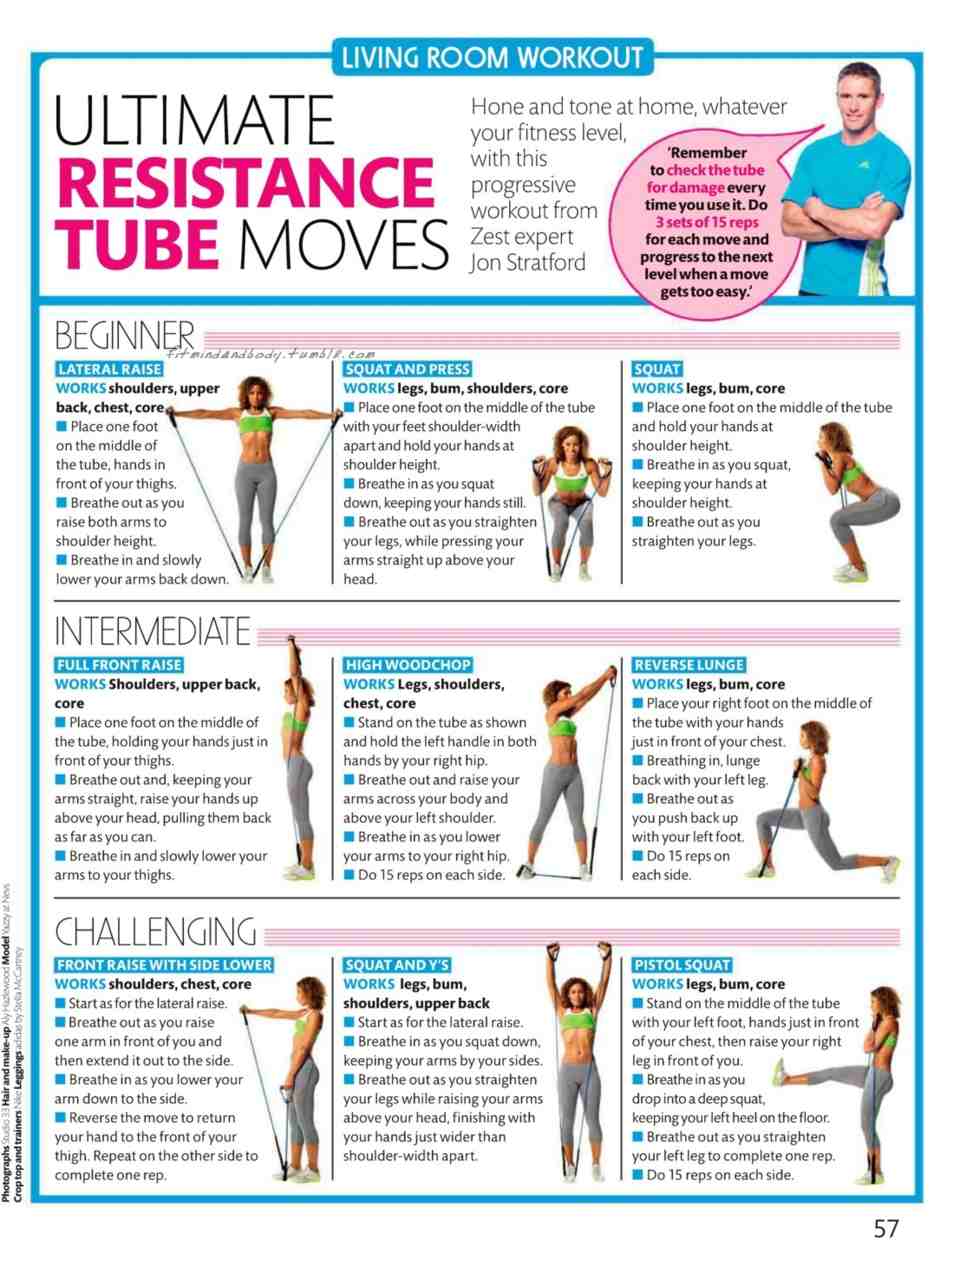 Discover the best resistance loop band exercises that fit your needs in this definitive article. | Check out the best beginner resistance band workout routine. #keepingfit #healthylifestyle #exercise #workouts #fitnessgoals #fitness #wellness